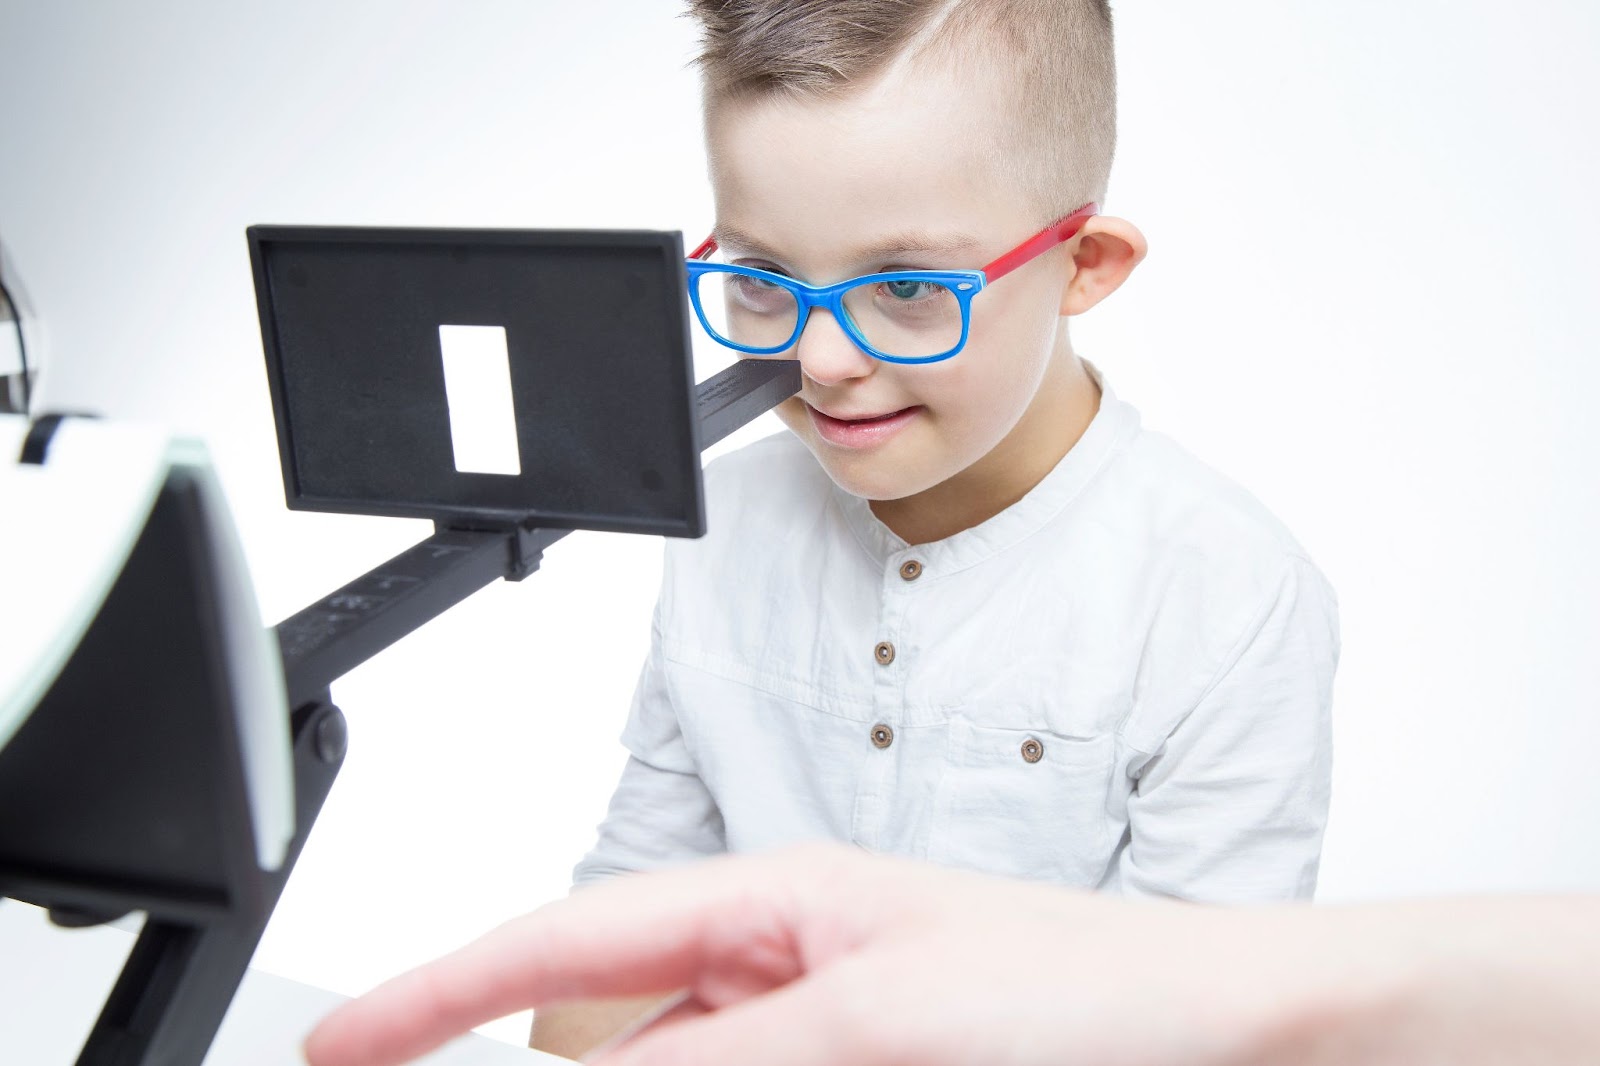 An image of a smiling child wearing glasses in vision therapy.
